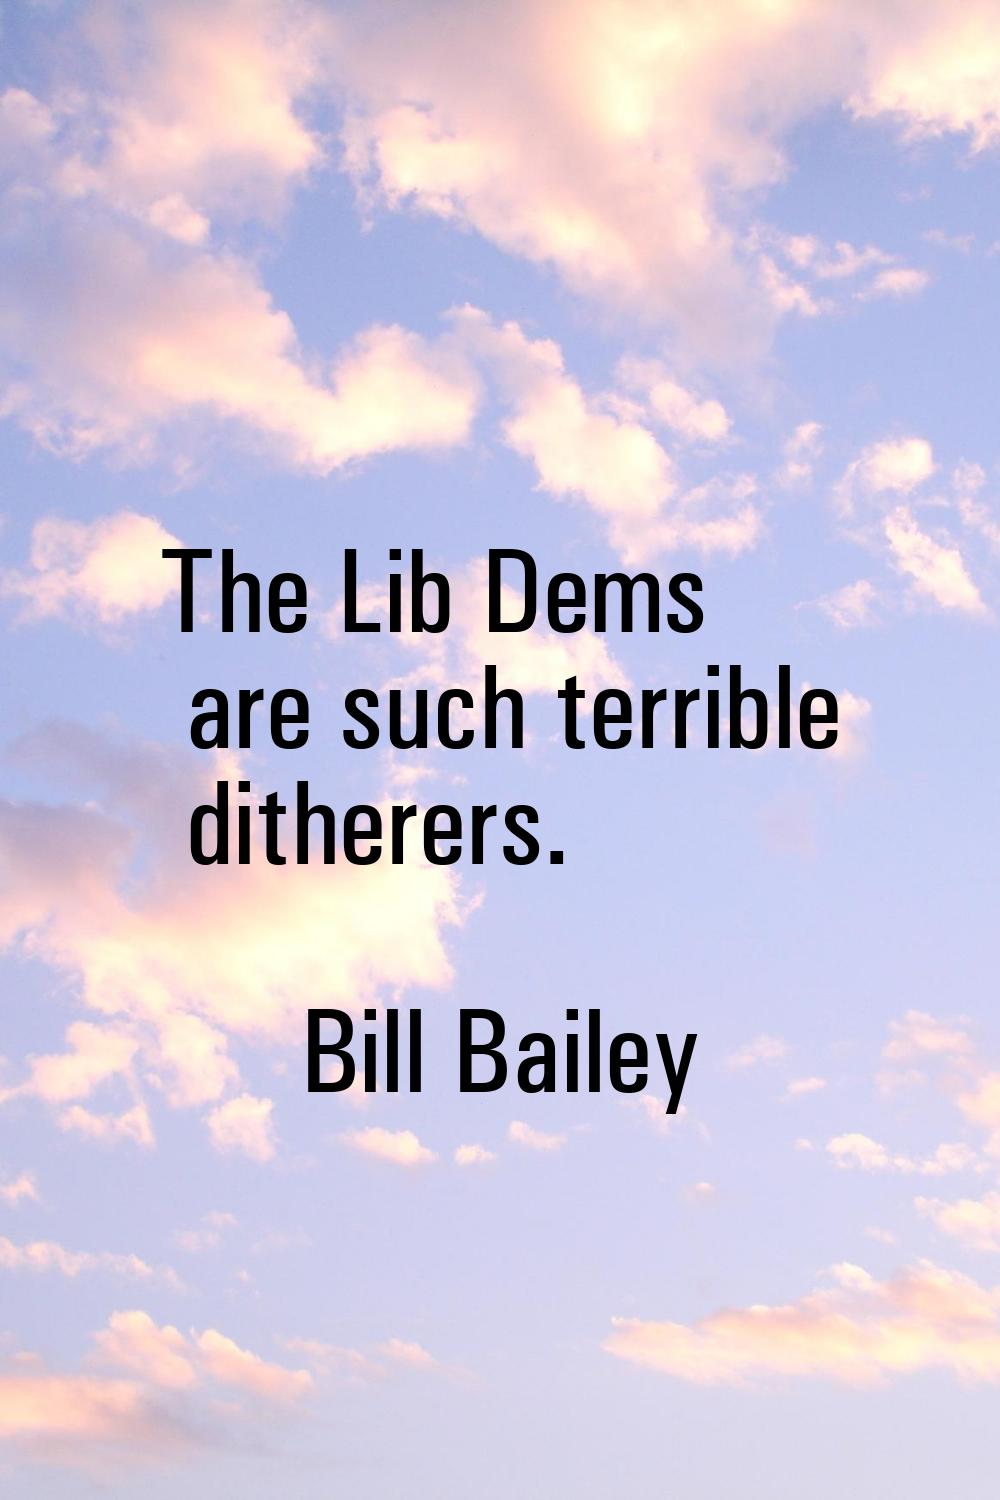 The Lib Dems are such terrible ditherers.